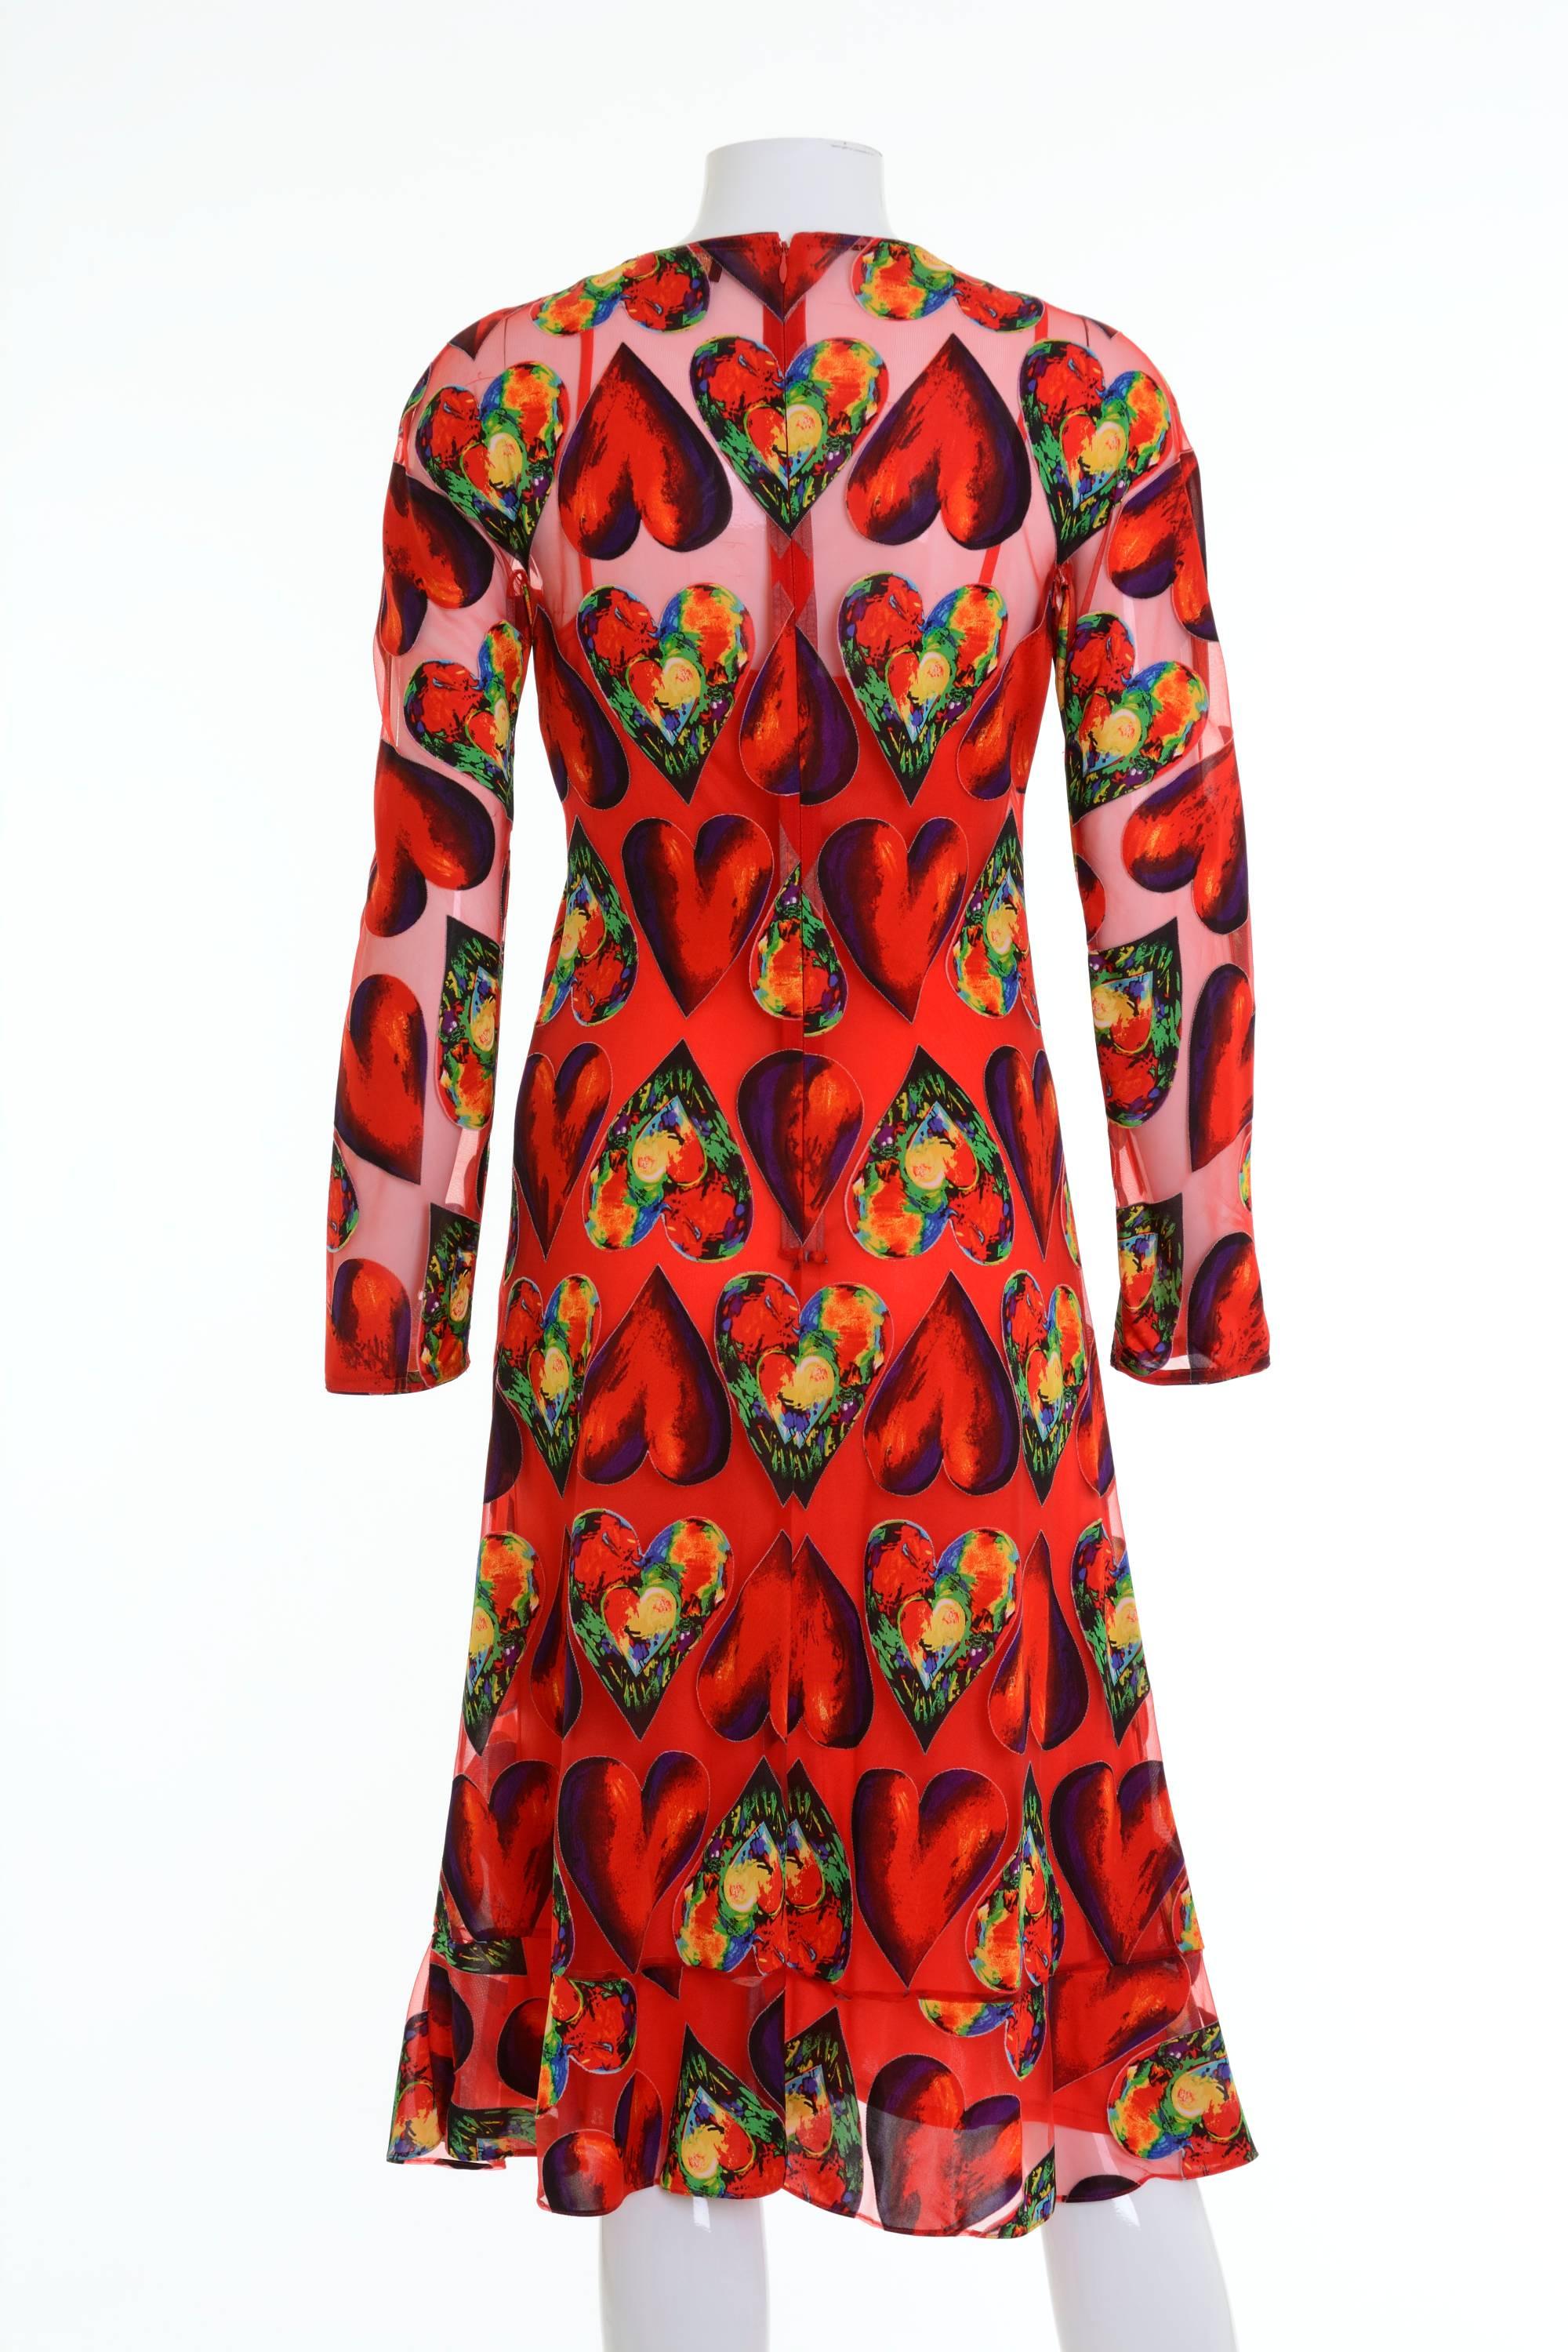 This amazing brightly colored dress from 1994 Gianni Versace collection in a synthetic blend. There are alternating hearts in red and bold colors on a sheer red background. The dress is long sleeved with a scoop neckline and a 5